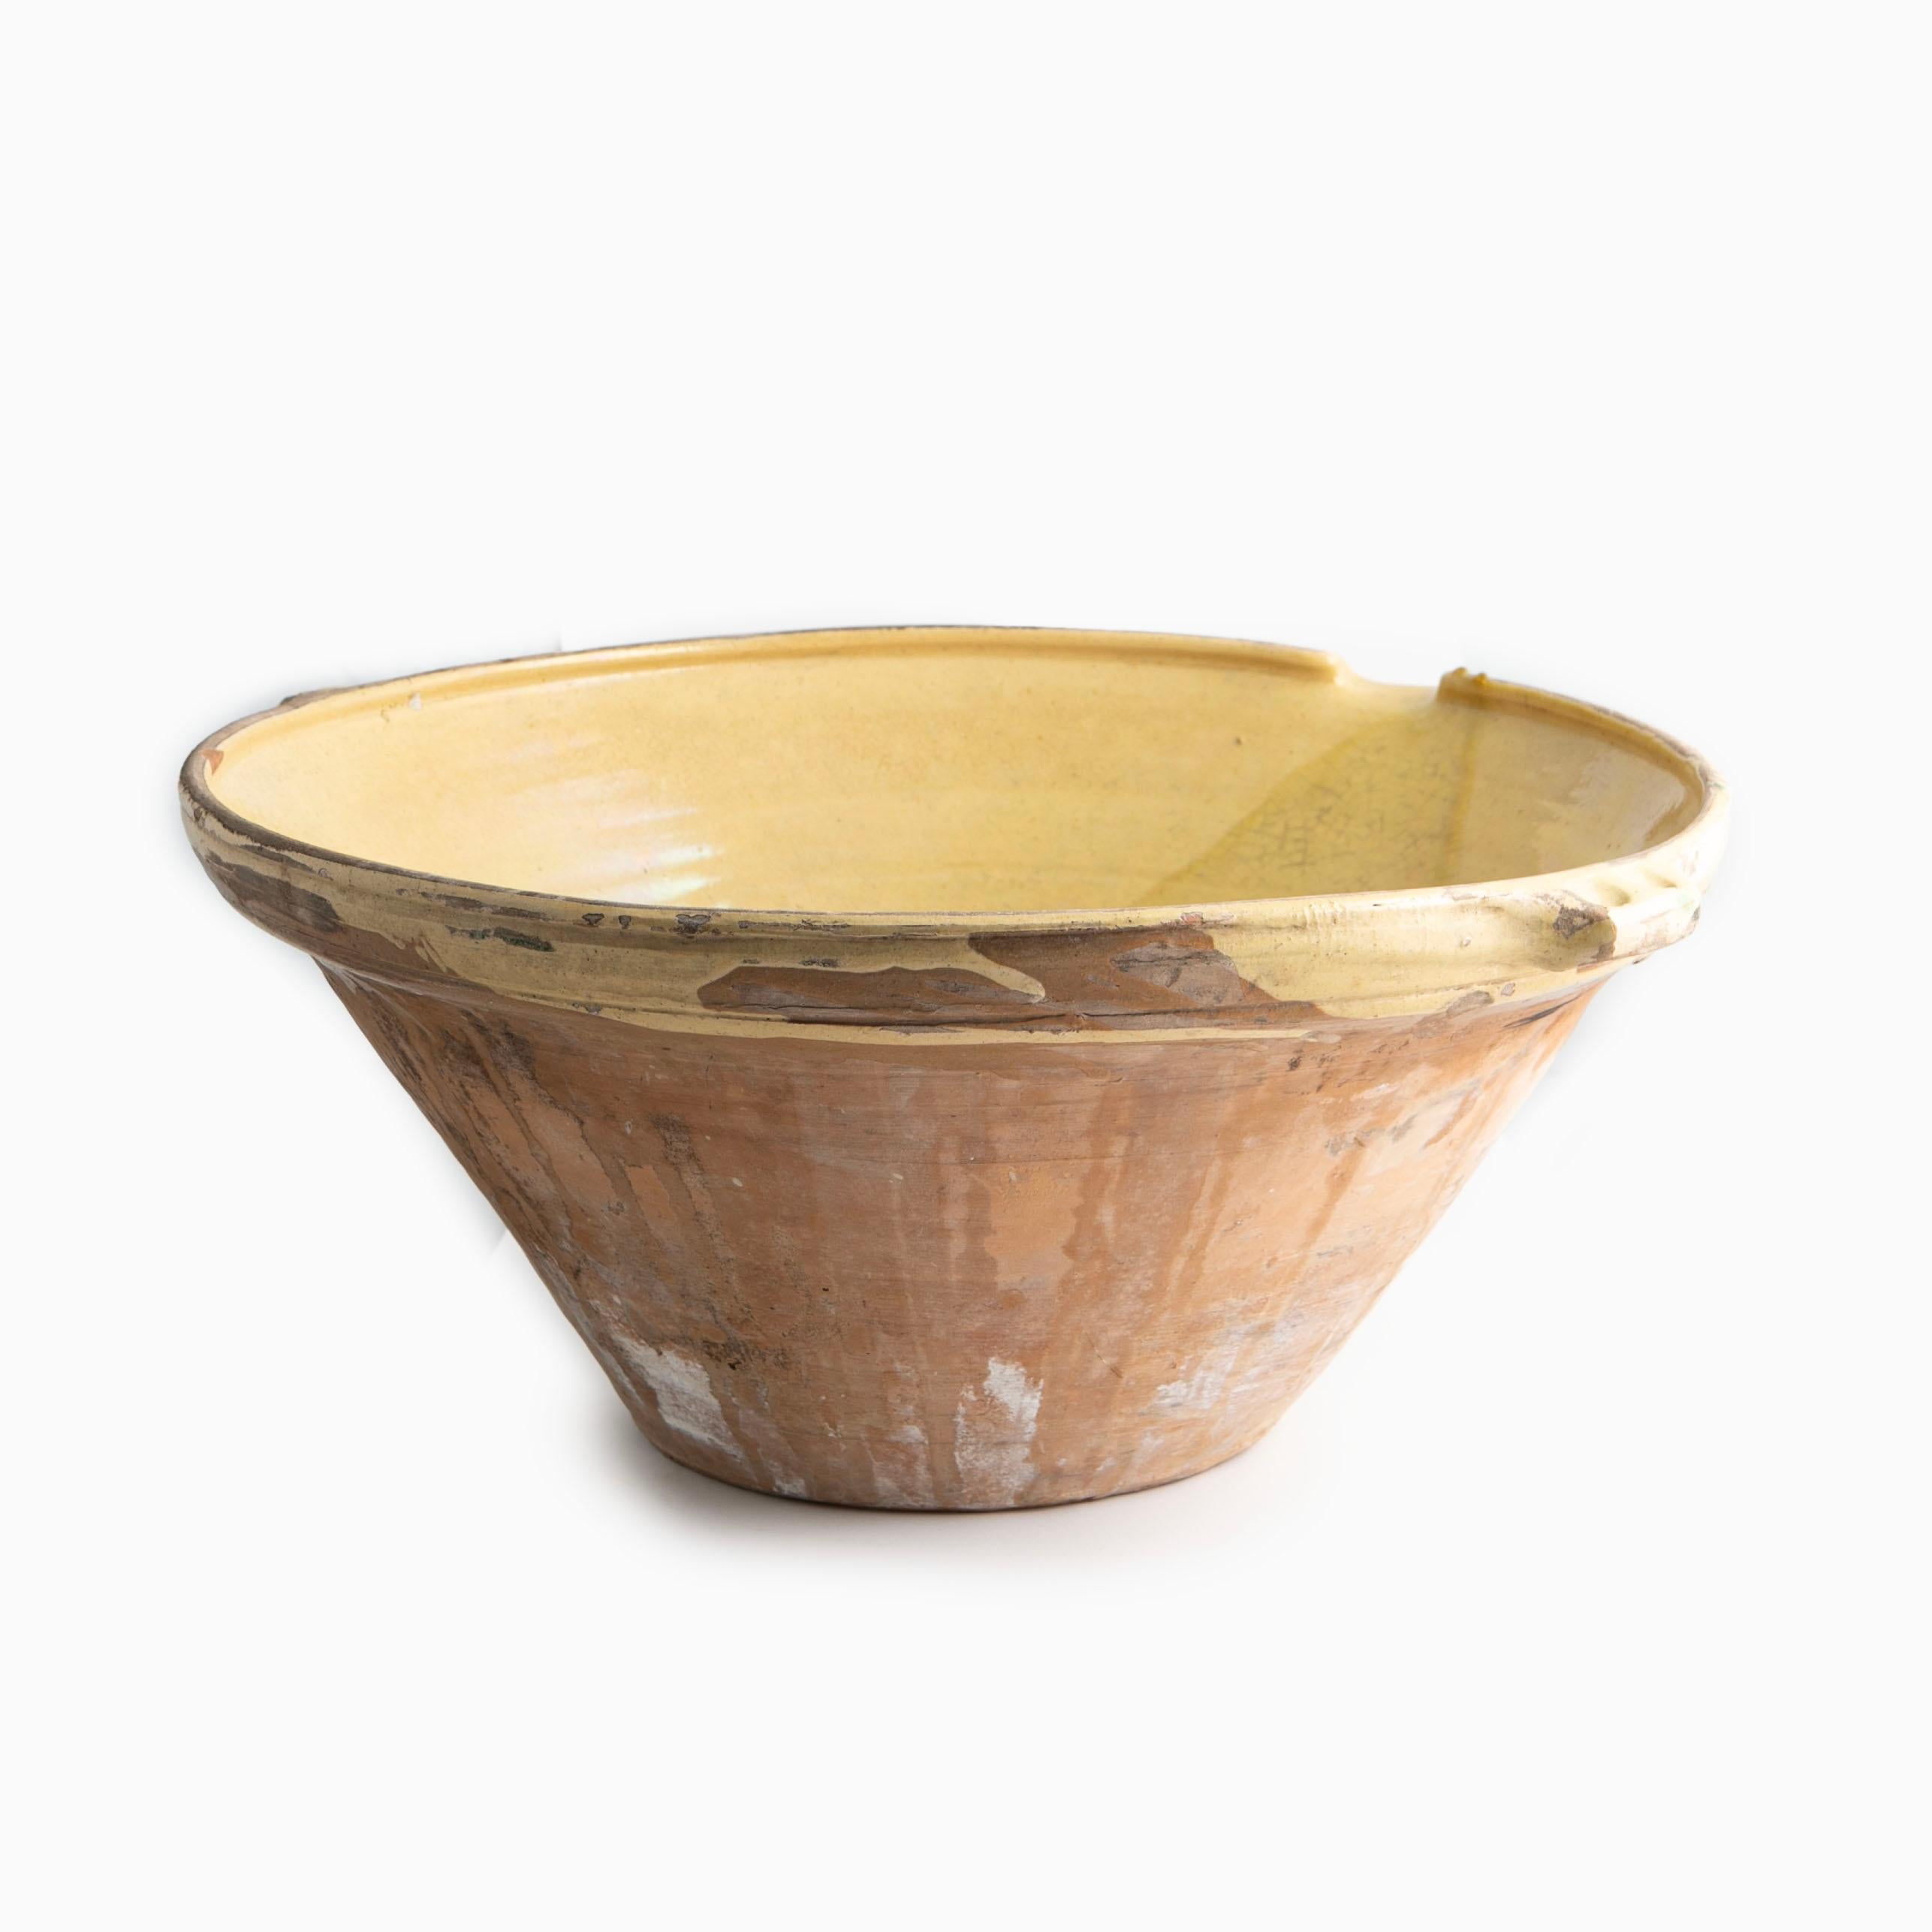 Other Large French Bowl 'Tian' with Yellow Glaze, 19th Century For Sale